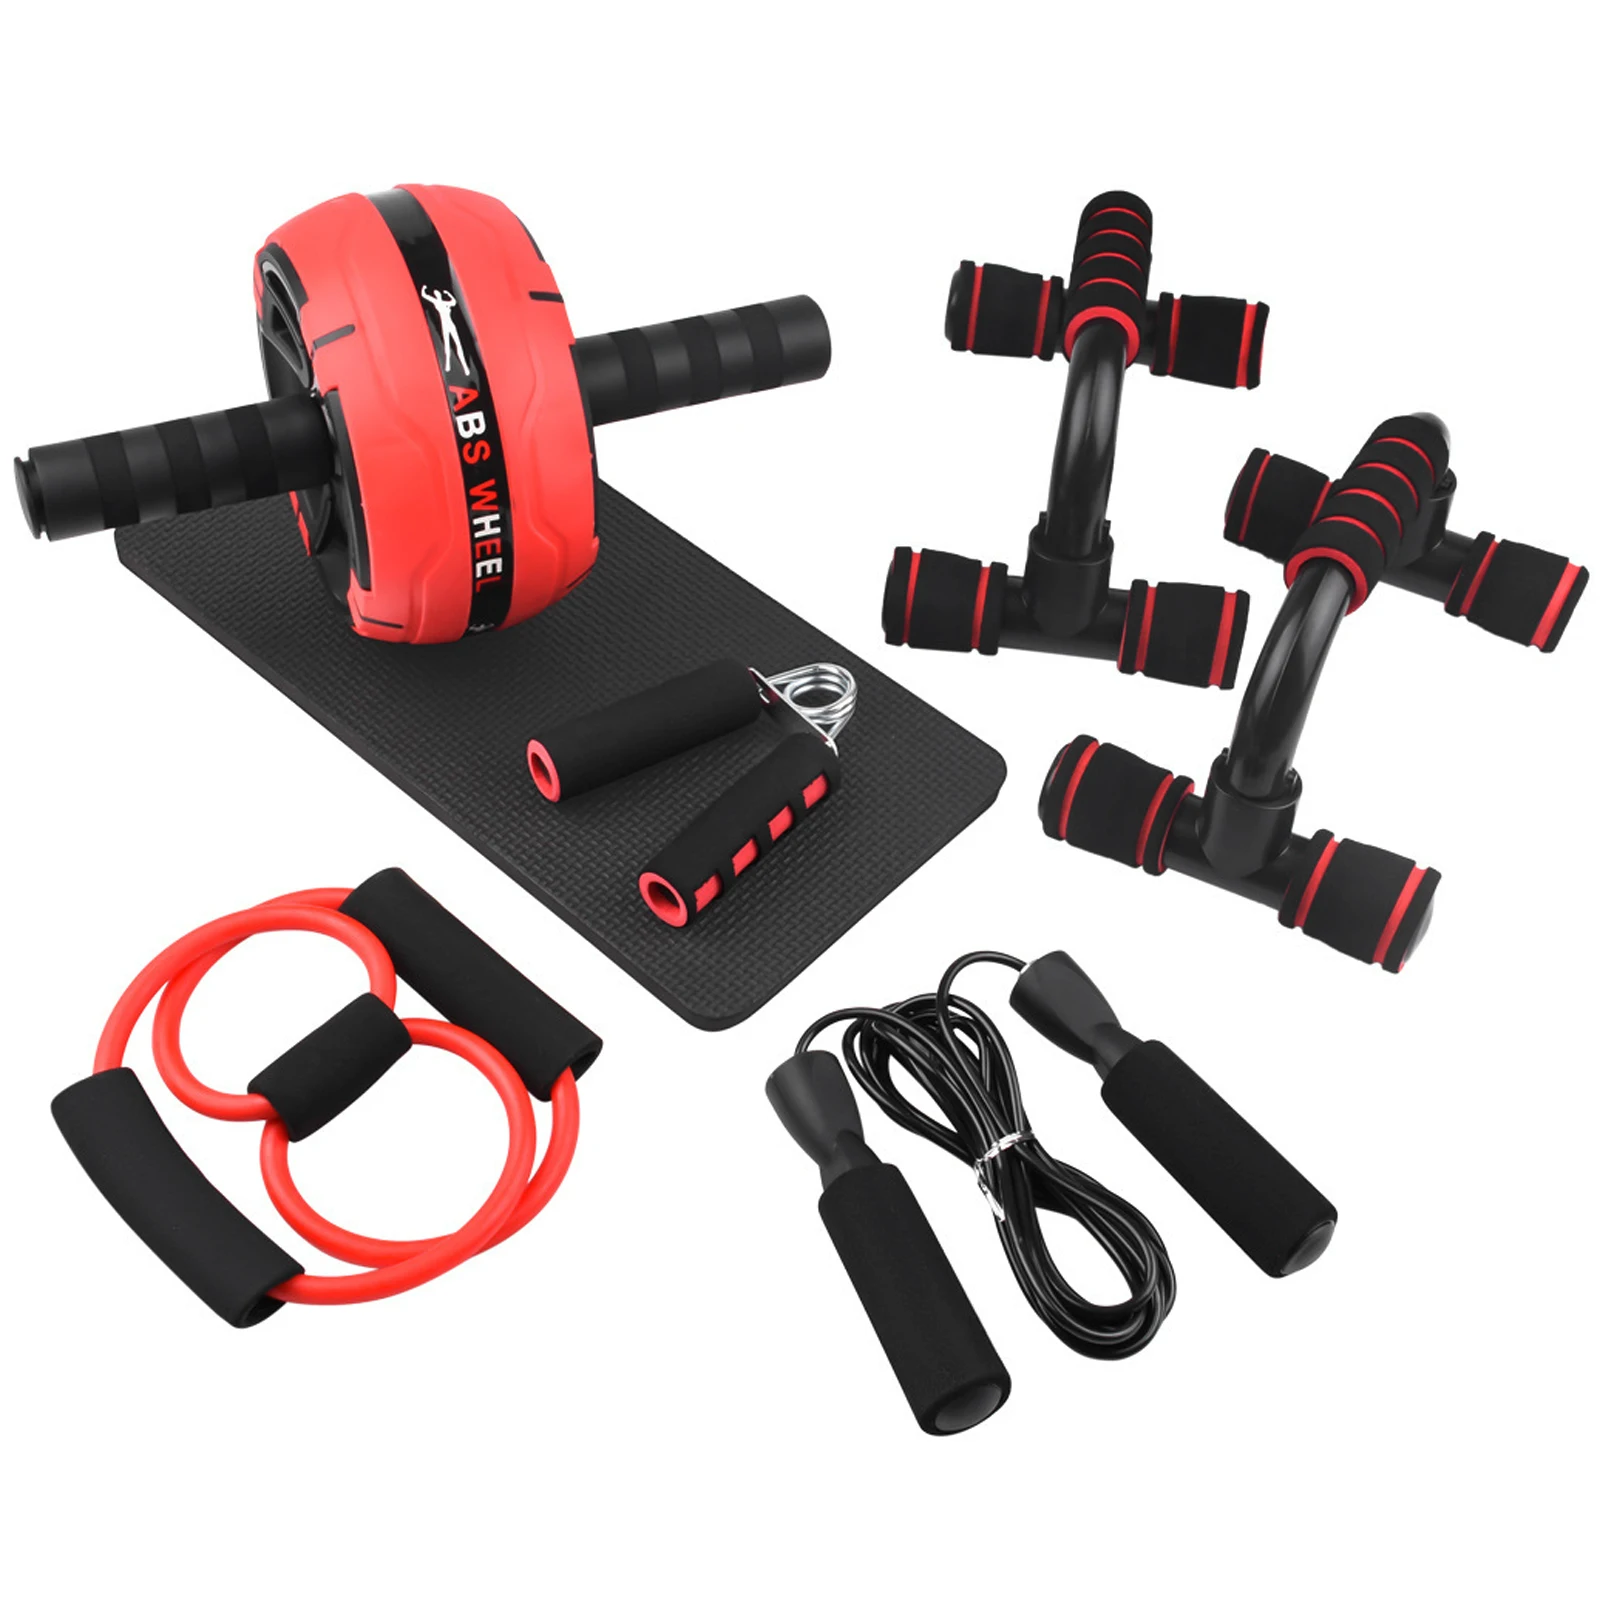 

AB Wheel Roller Kit Abdominal Wheel Set with Push-Up Bar Jump Rope Hand Gripper and Knee Pad Home Gym Workout Equipment